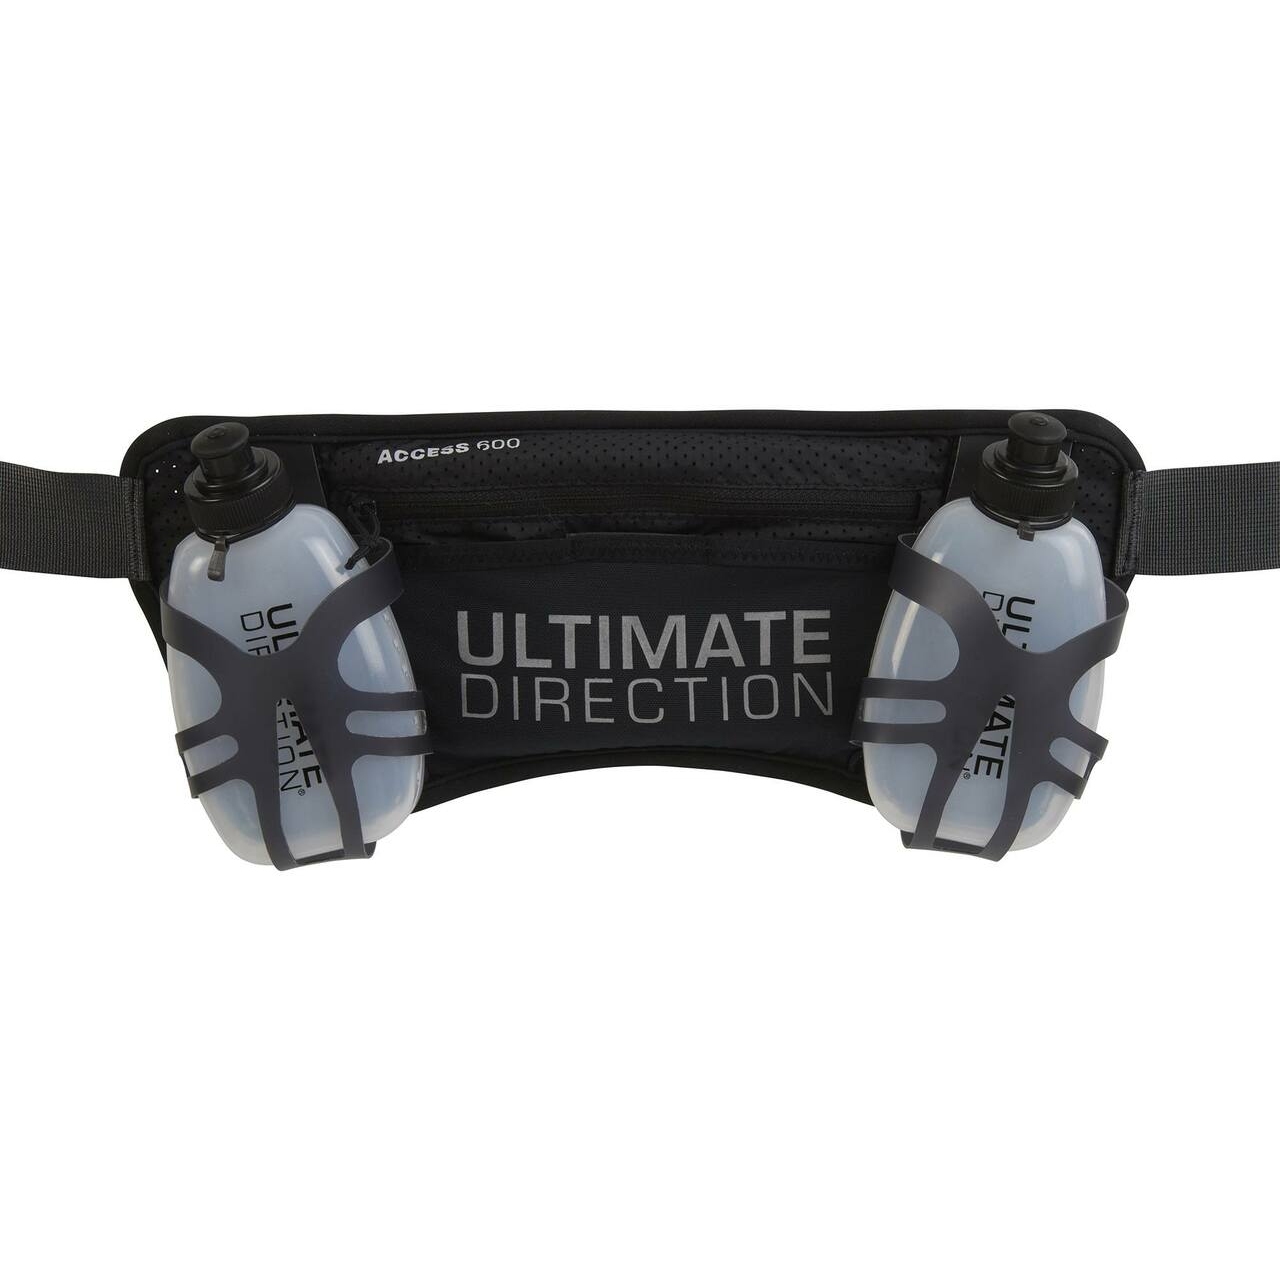 Productfoto van Ultimate Direction Access 600 Hydration Belt - Onyx